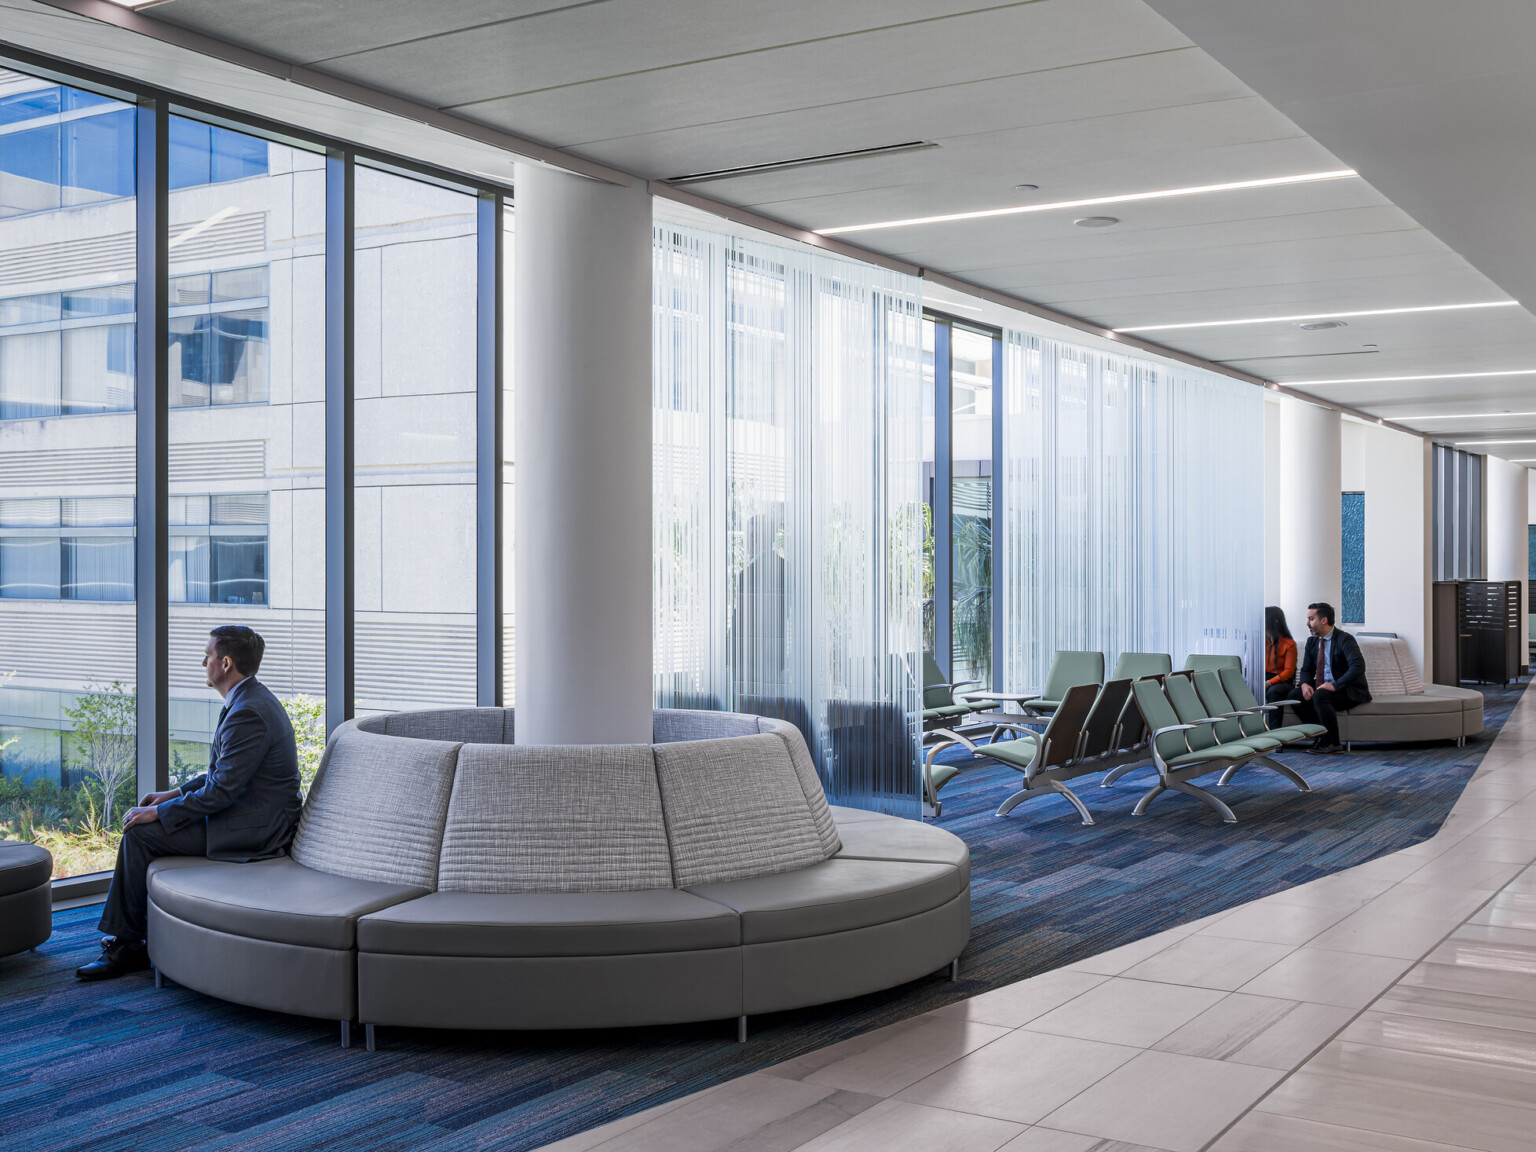 courthouse public area, high-ceilings, floor-to-ceiling windows provide natural light for well-being, natural wood and blue low-pile carpet, modern circular upholstered group seating